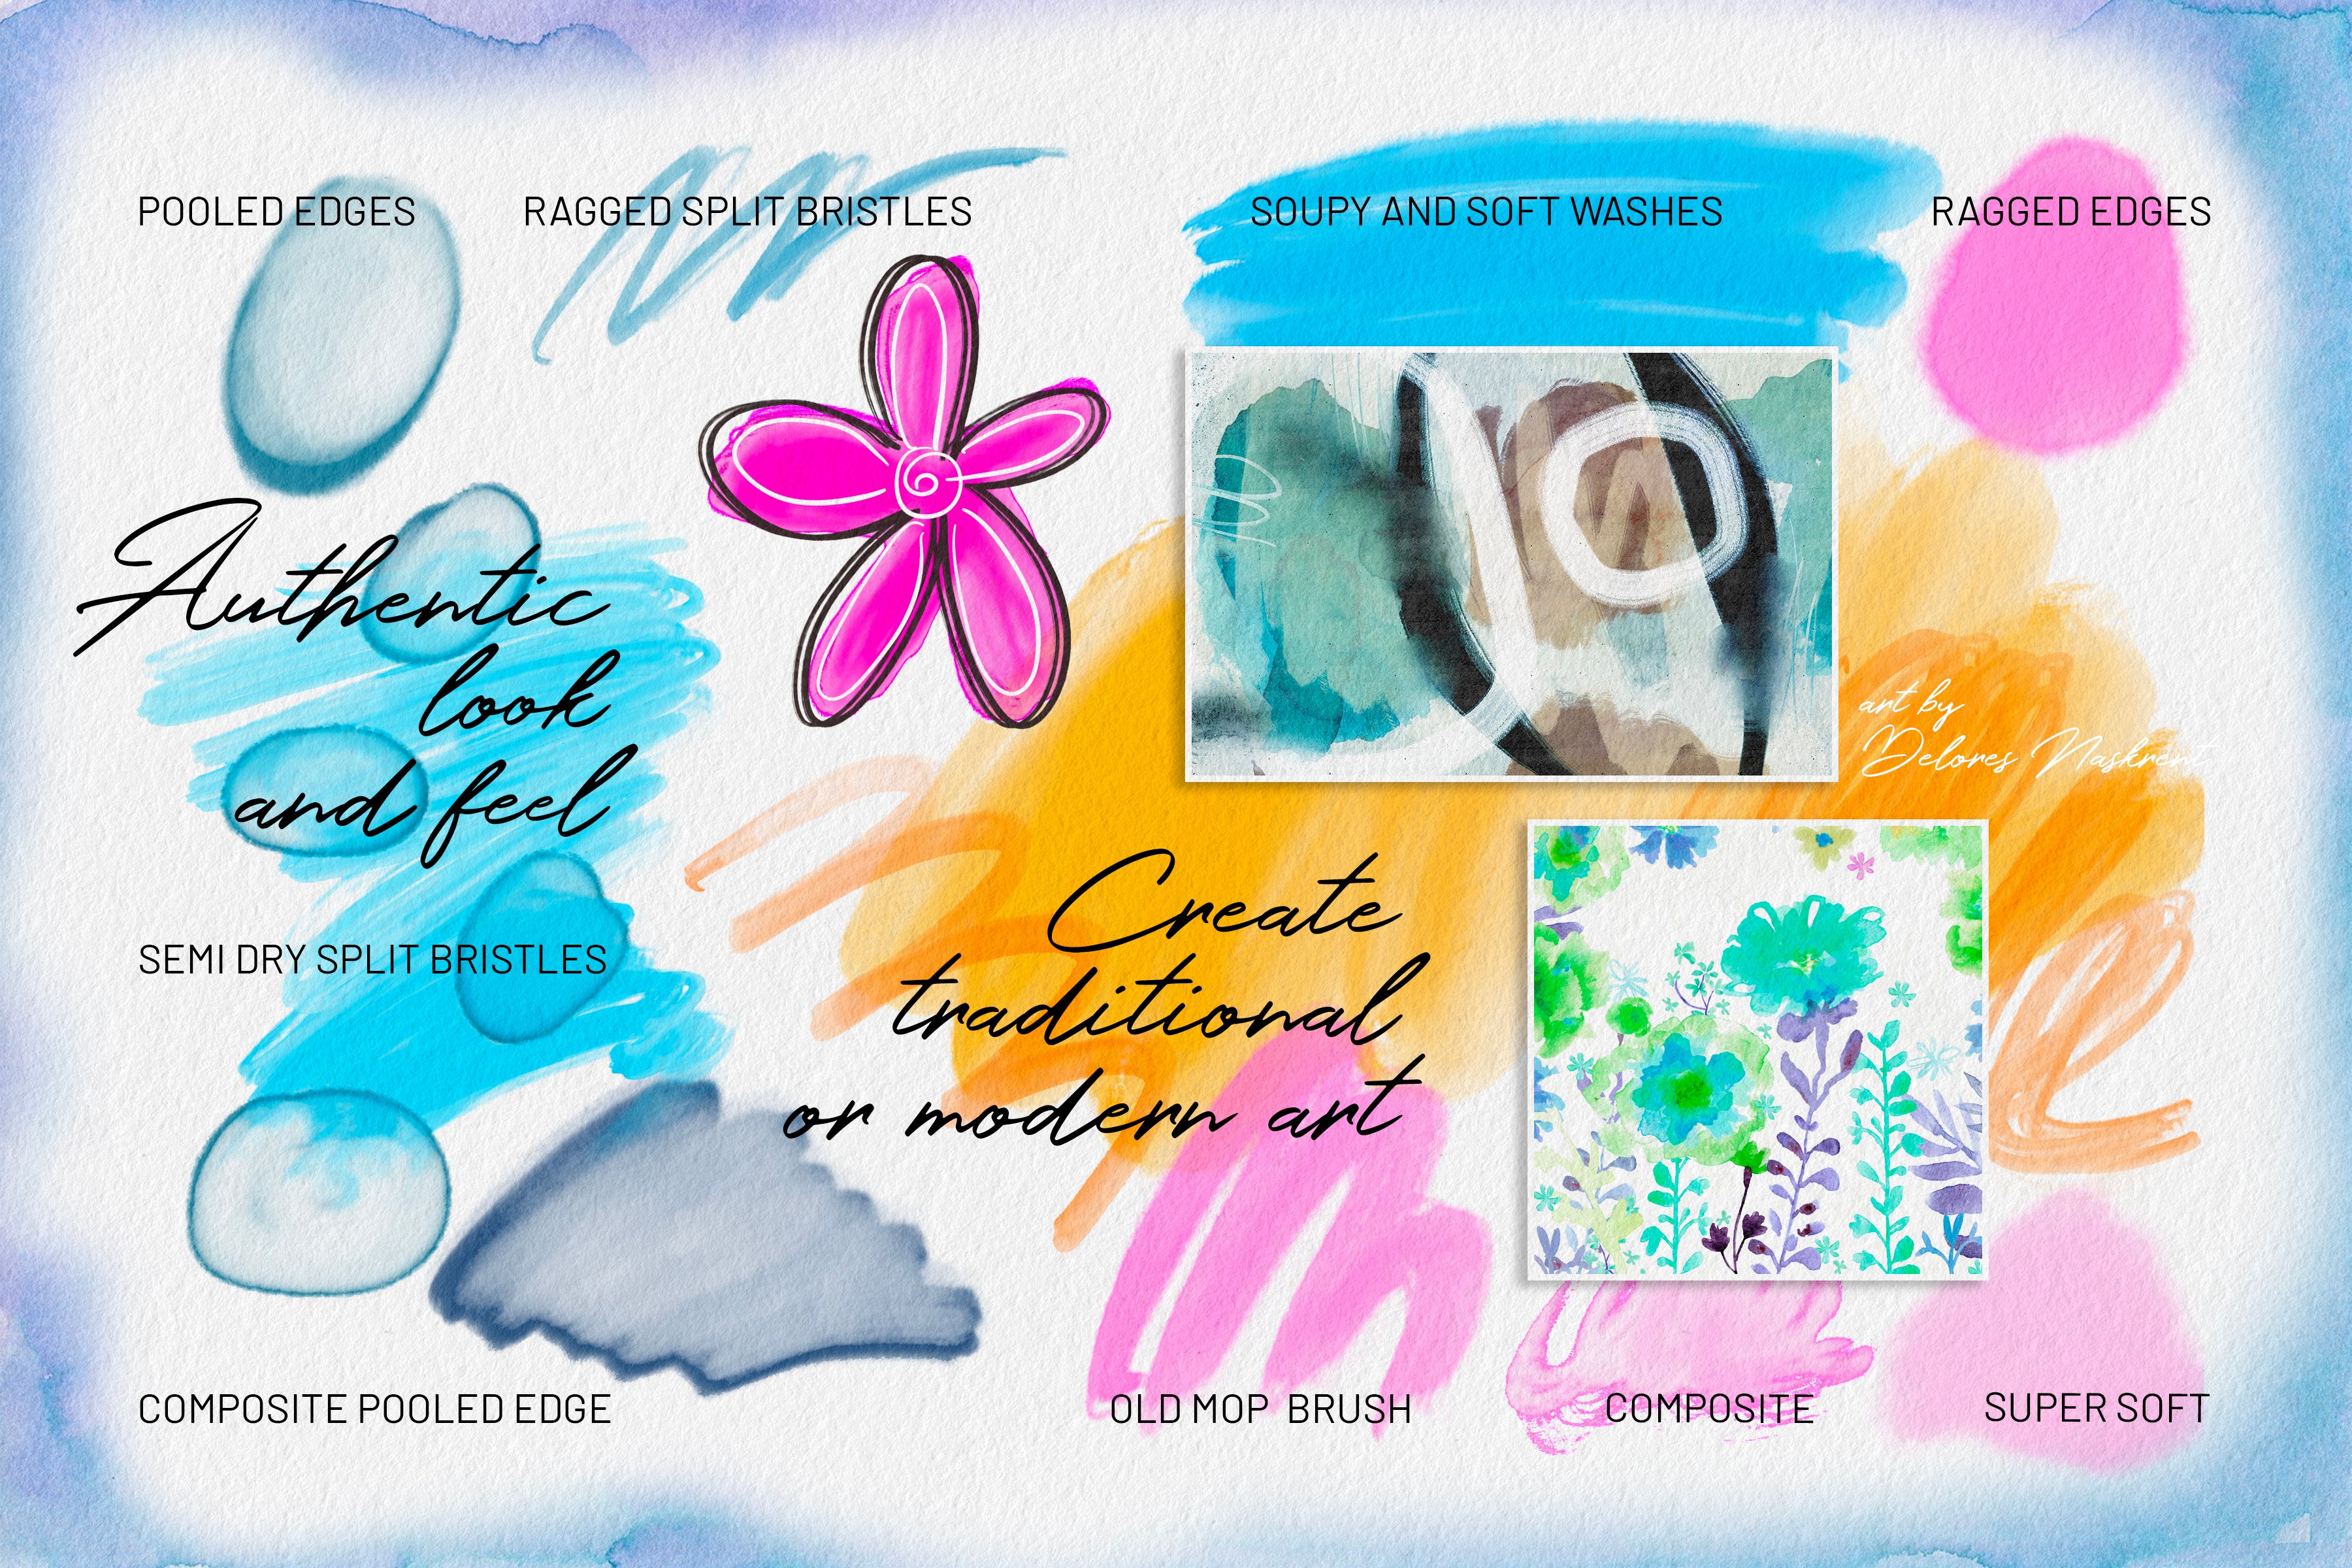 Volume 034 - Watercolor Brushes for Procreate by DeloresArt